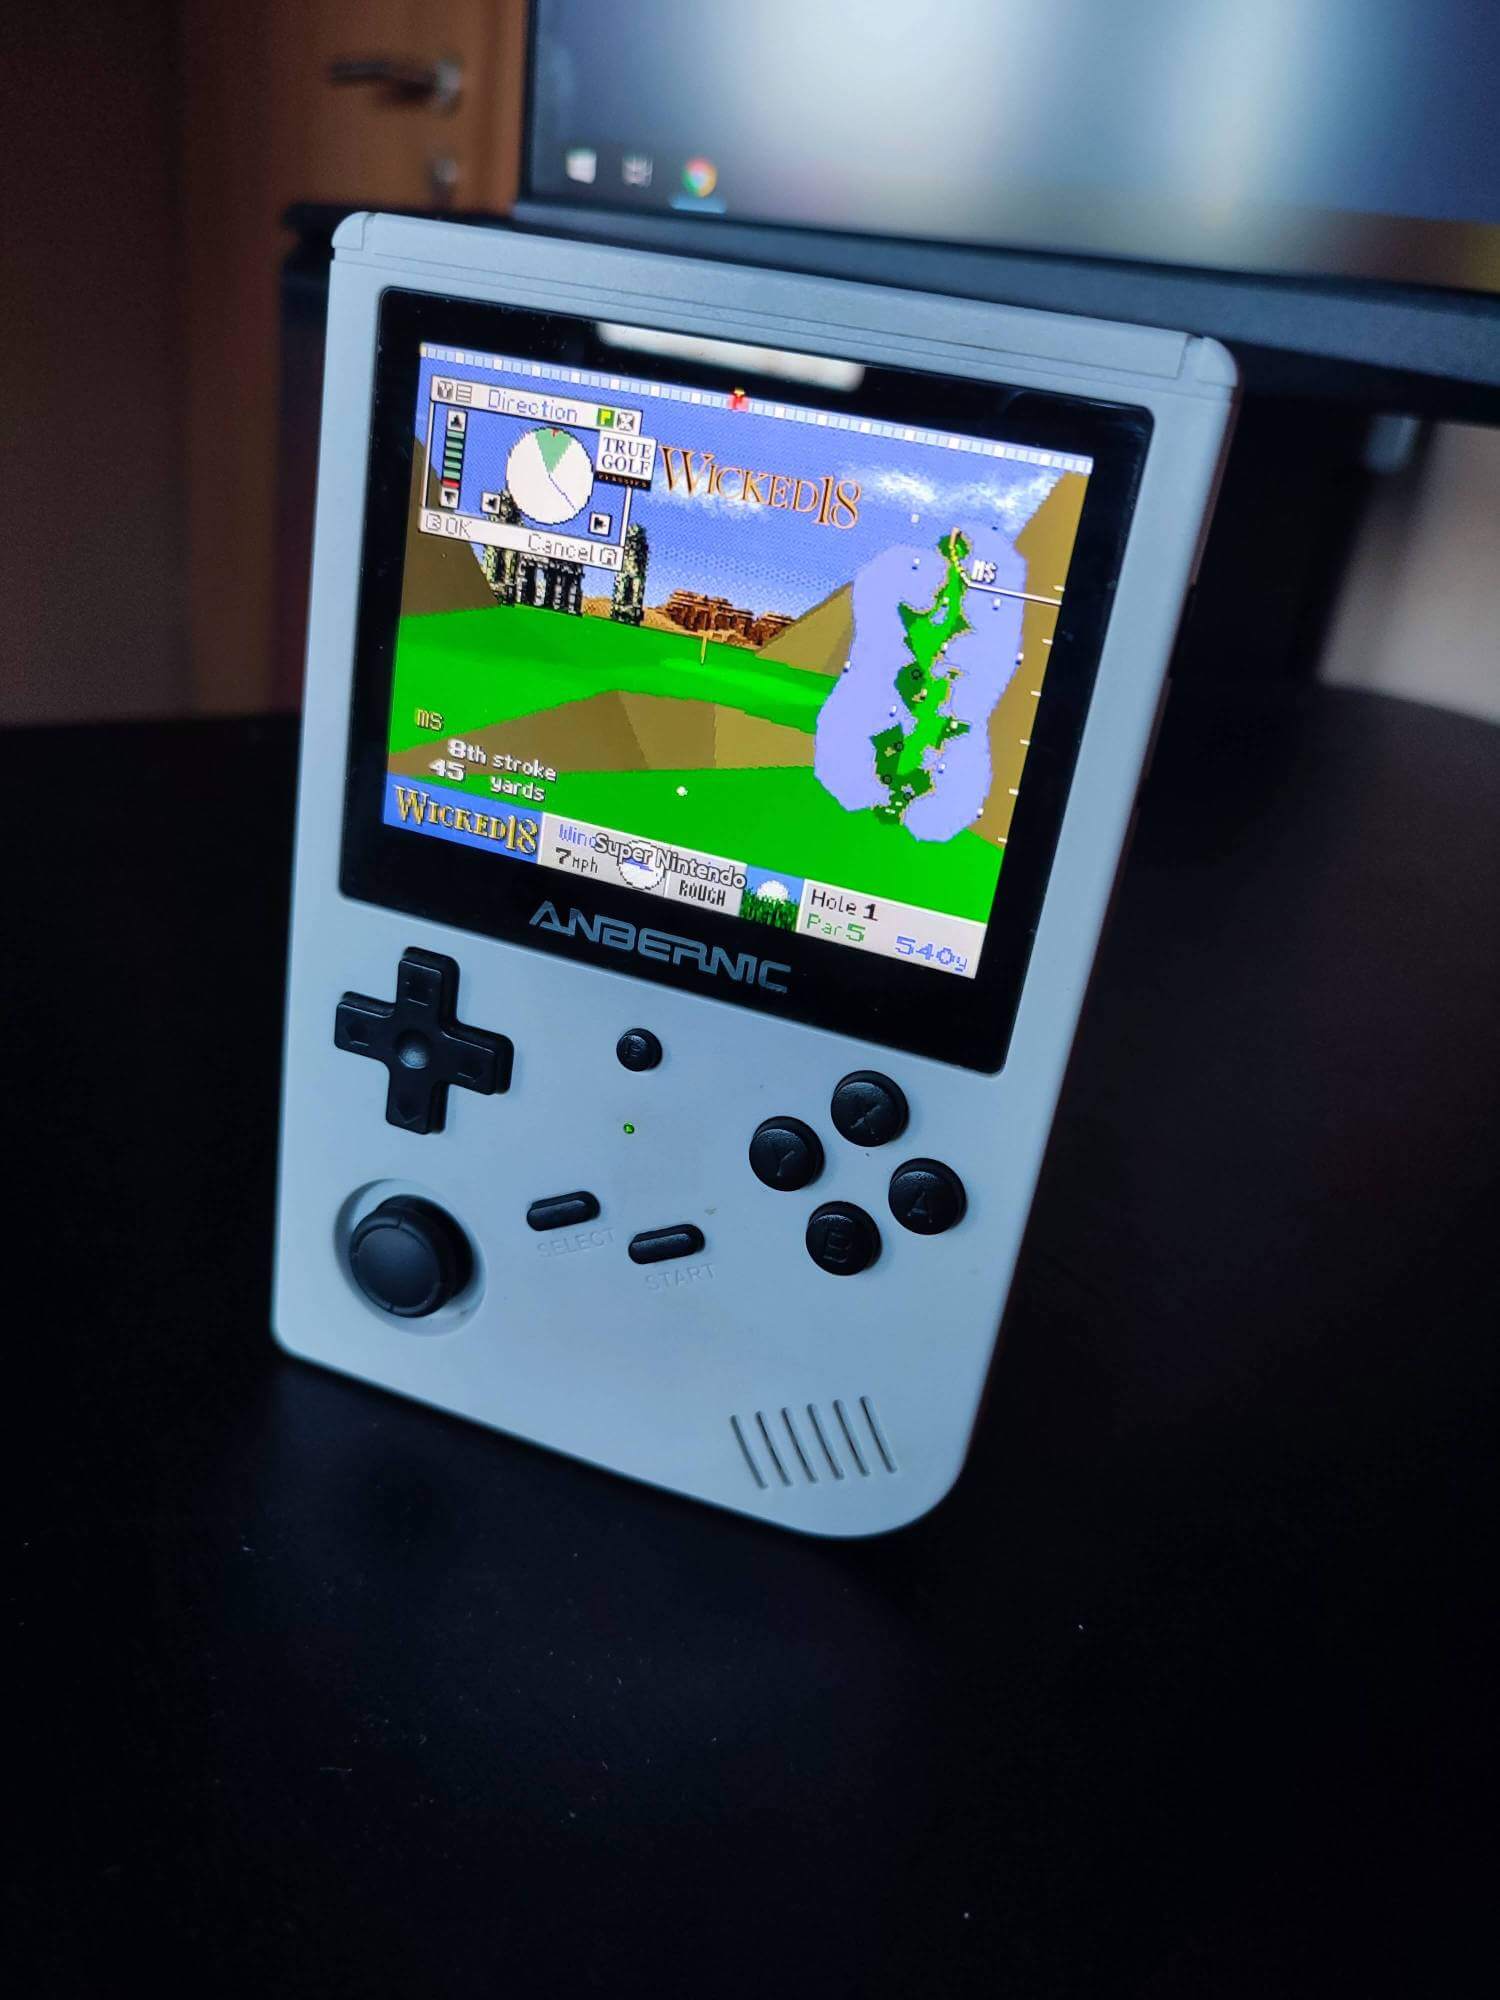 The Anbernic RG351 is a Linux-based handheld game console made in China. Although it mimics the functionality of the Nintendo Game Boy Advance, it’s also capable of emulating games from other platforms